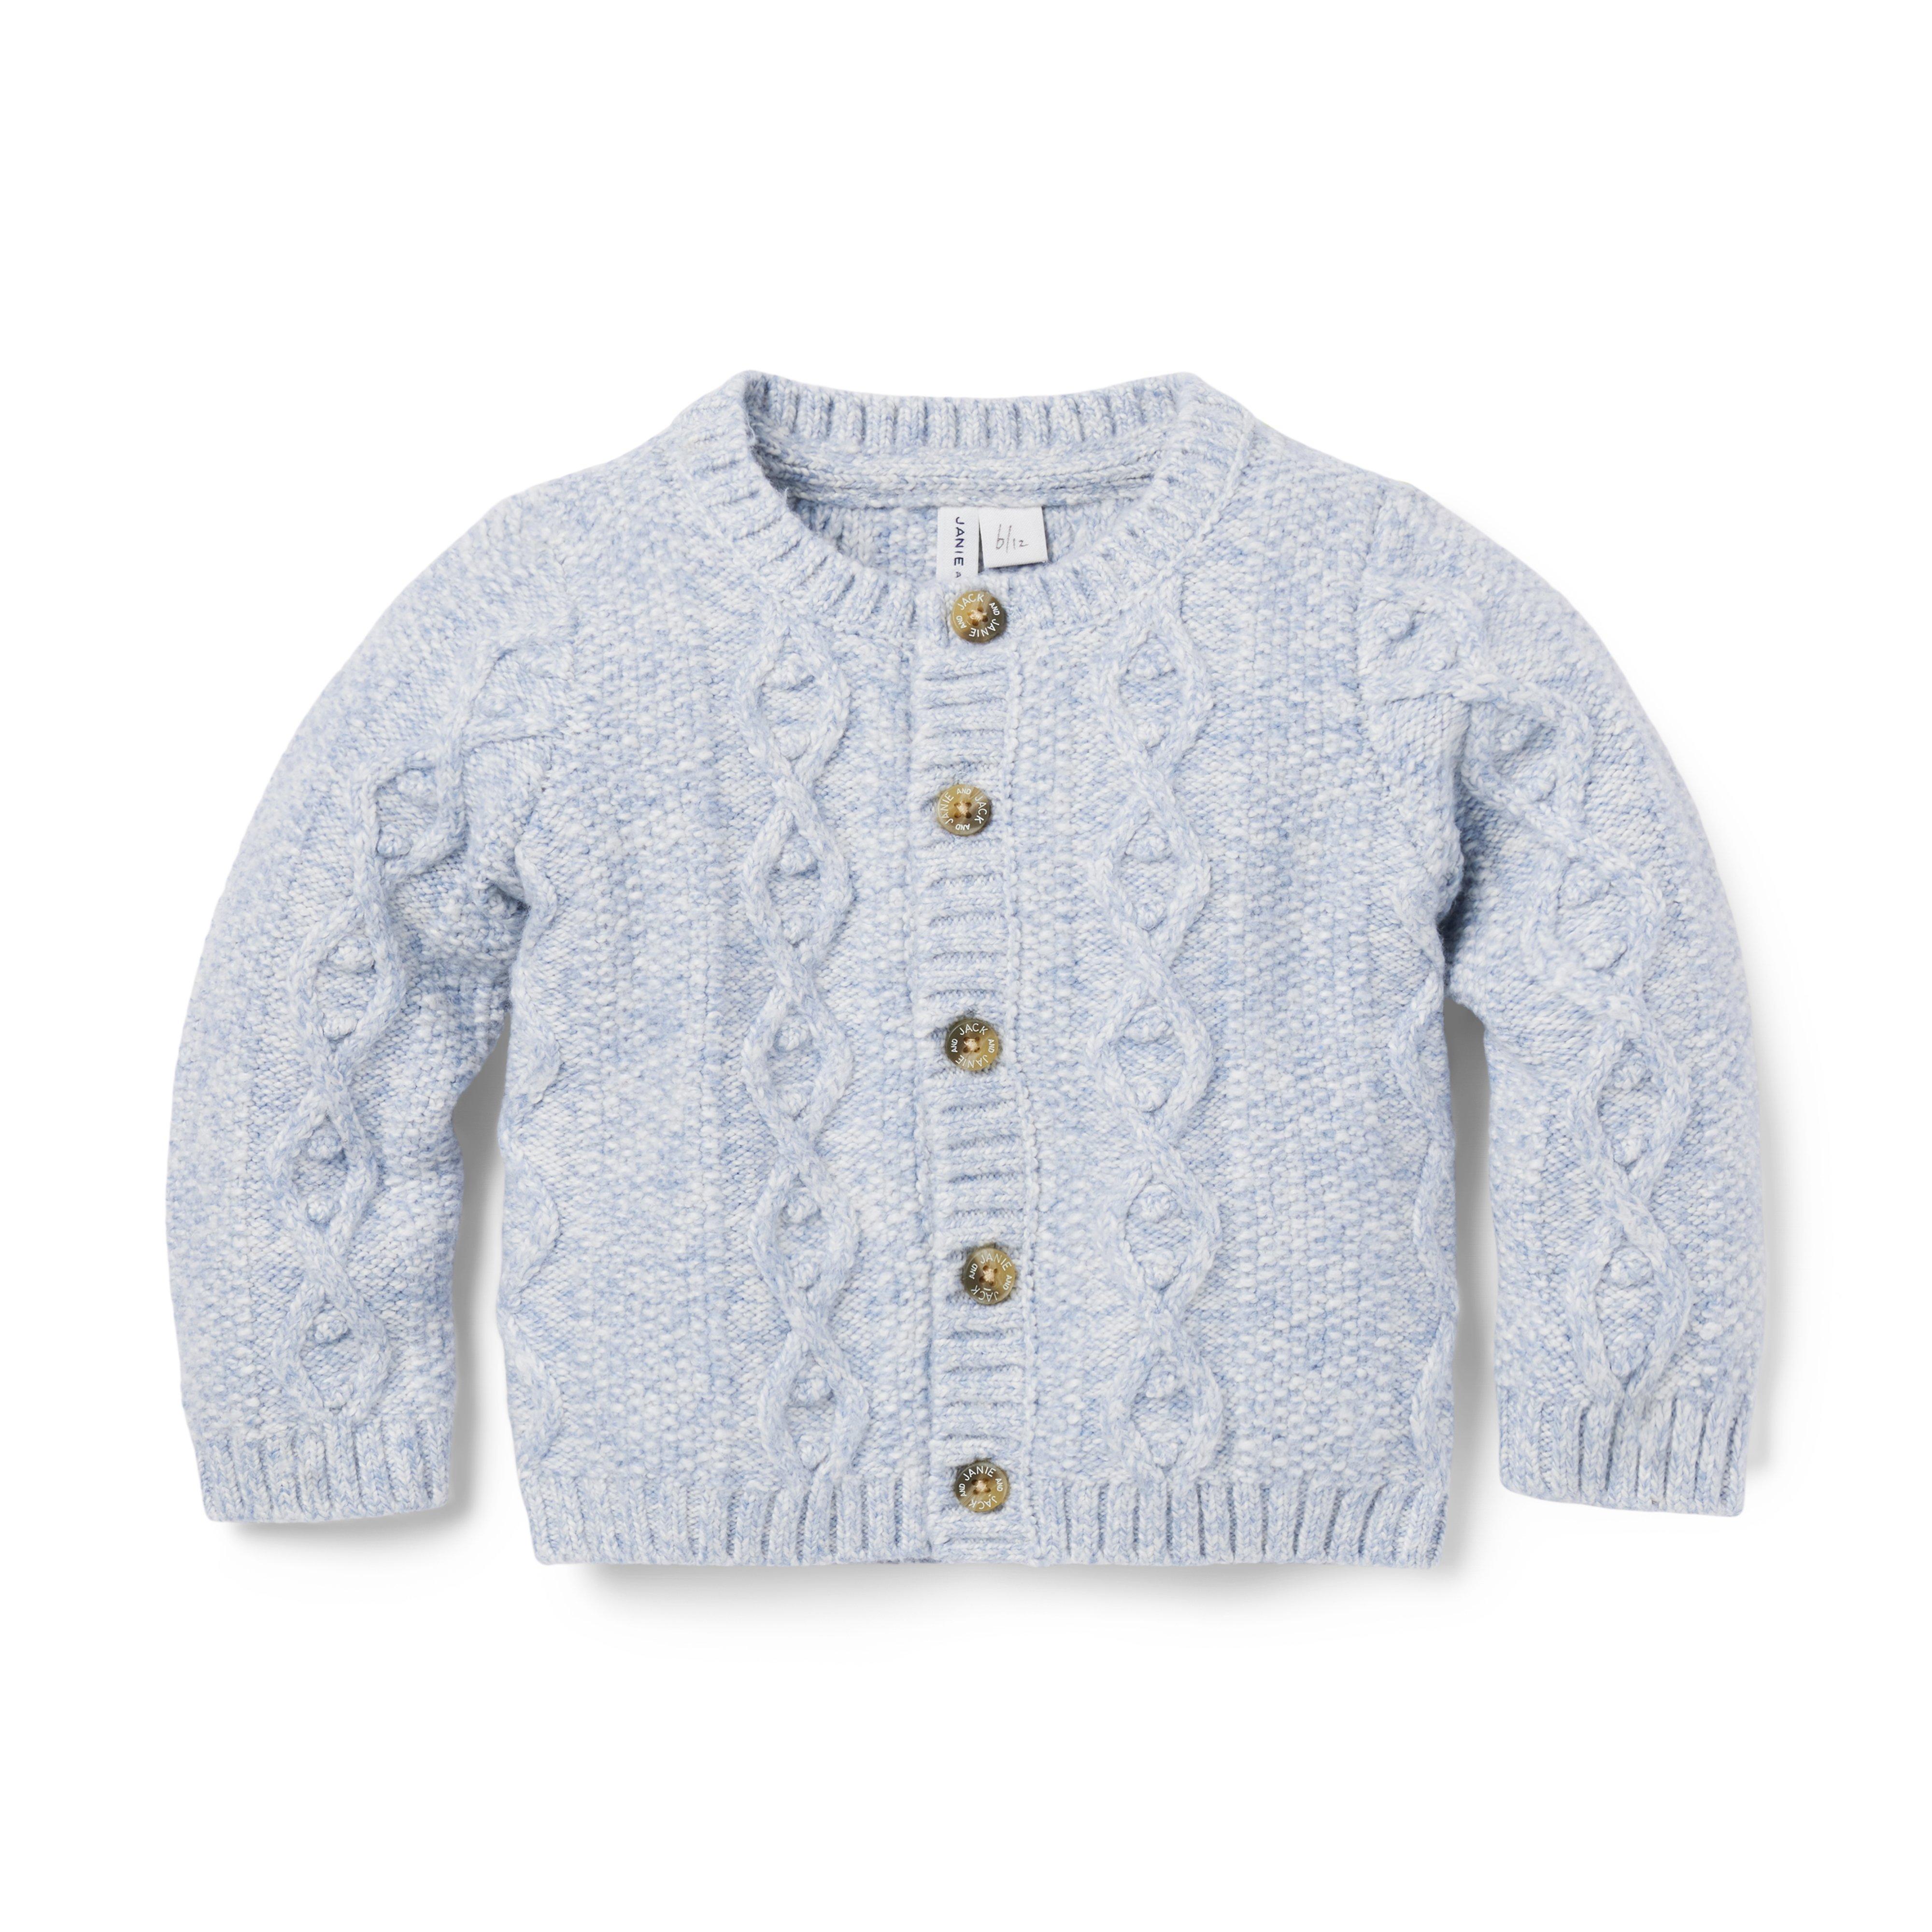 The Cozy Cable Knit Baby Cardigan